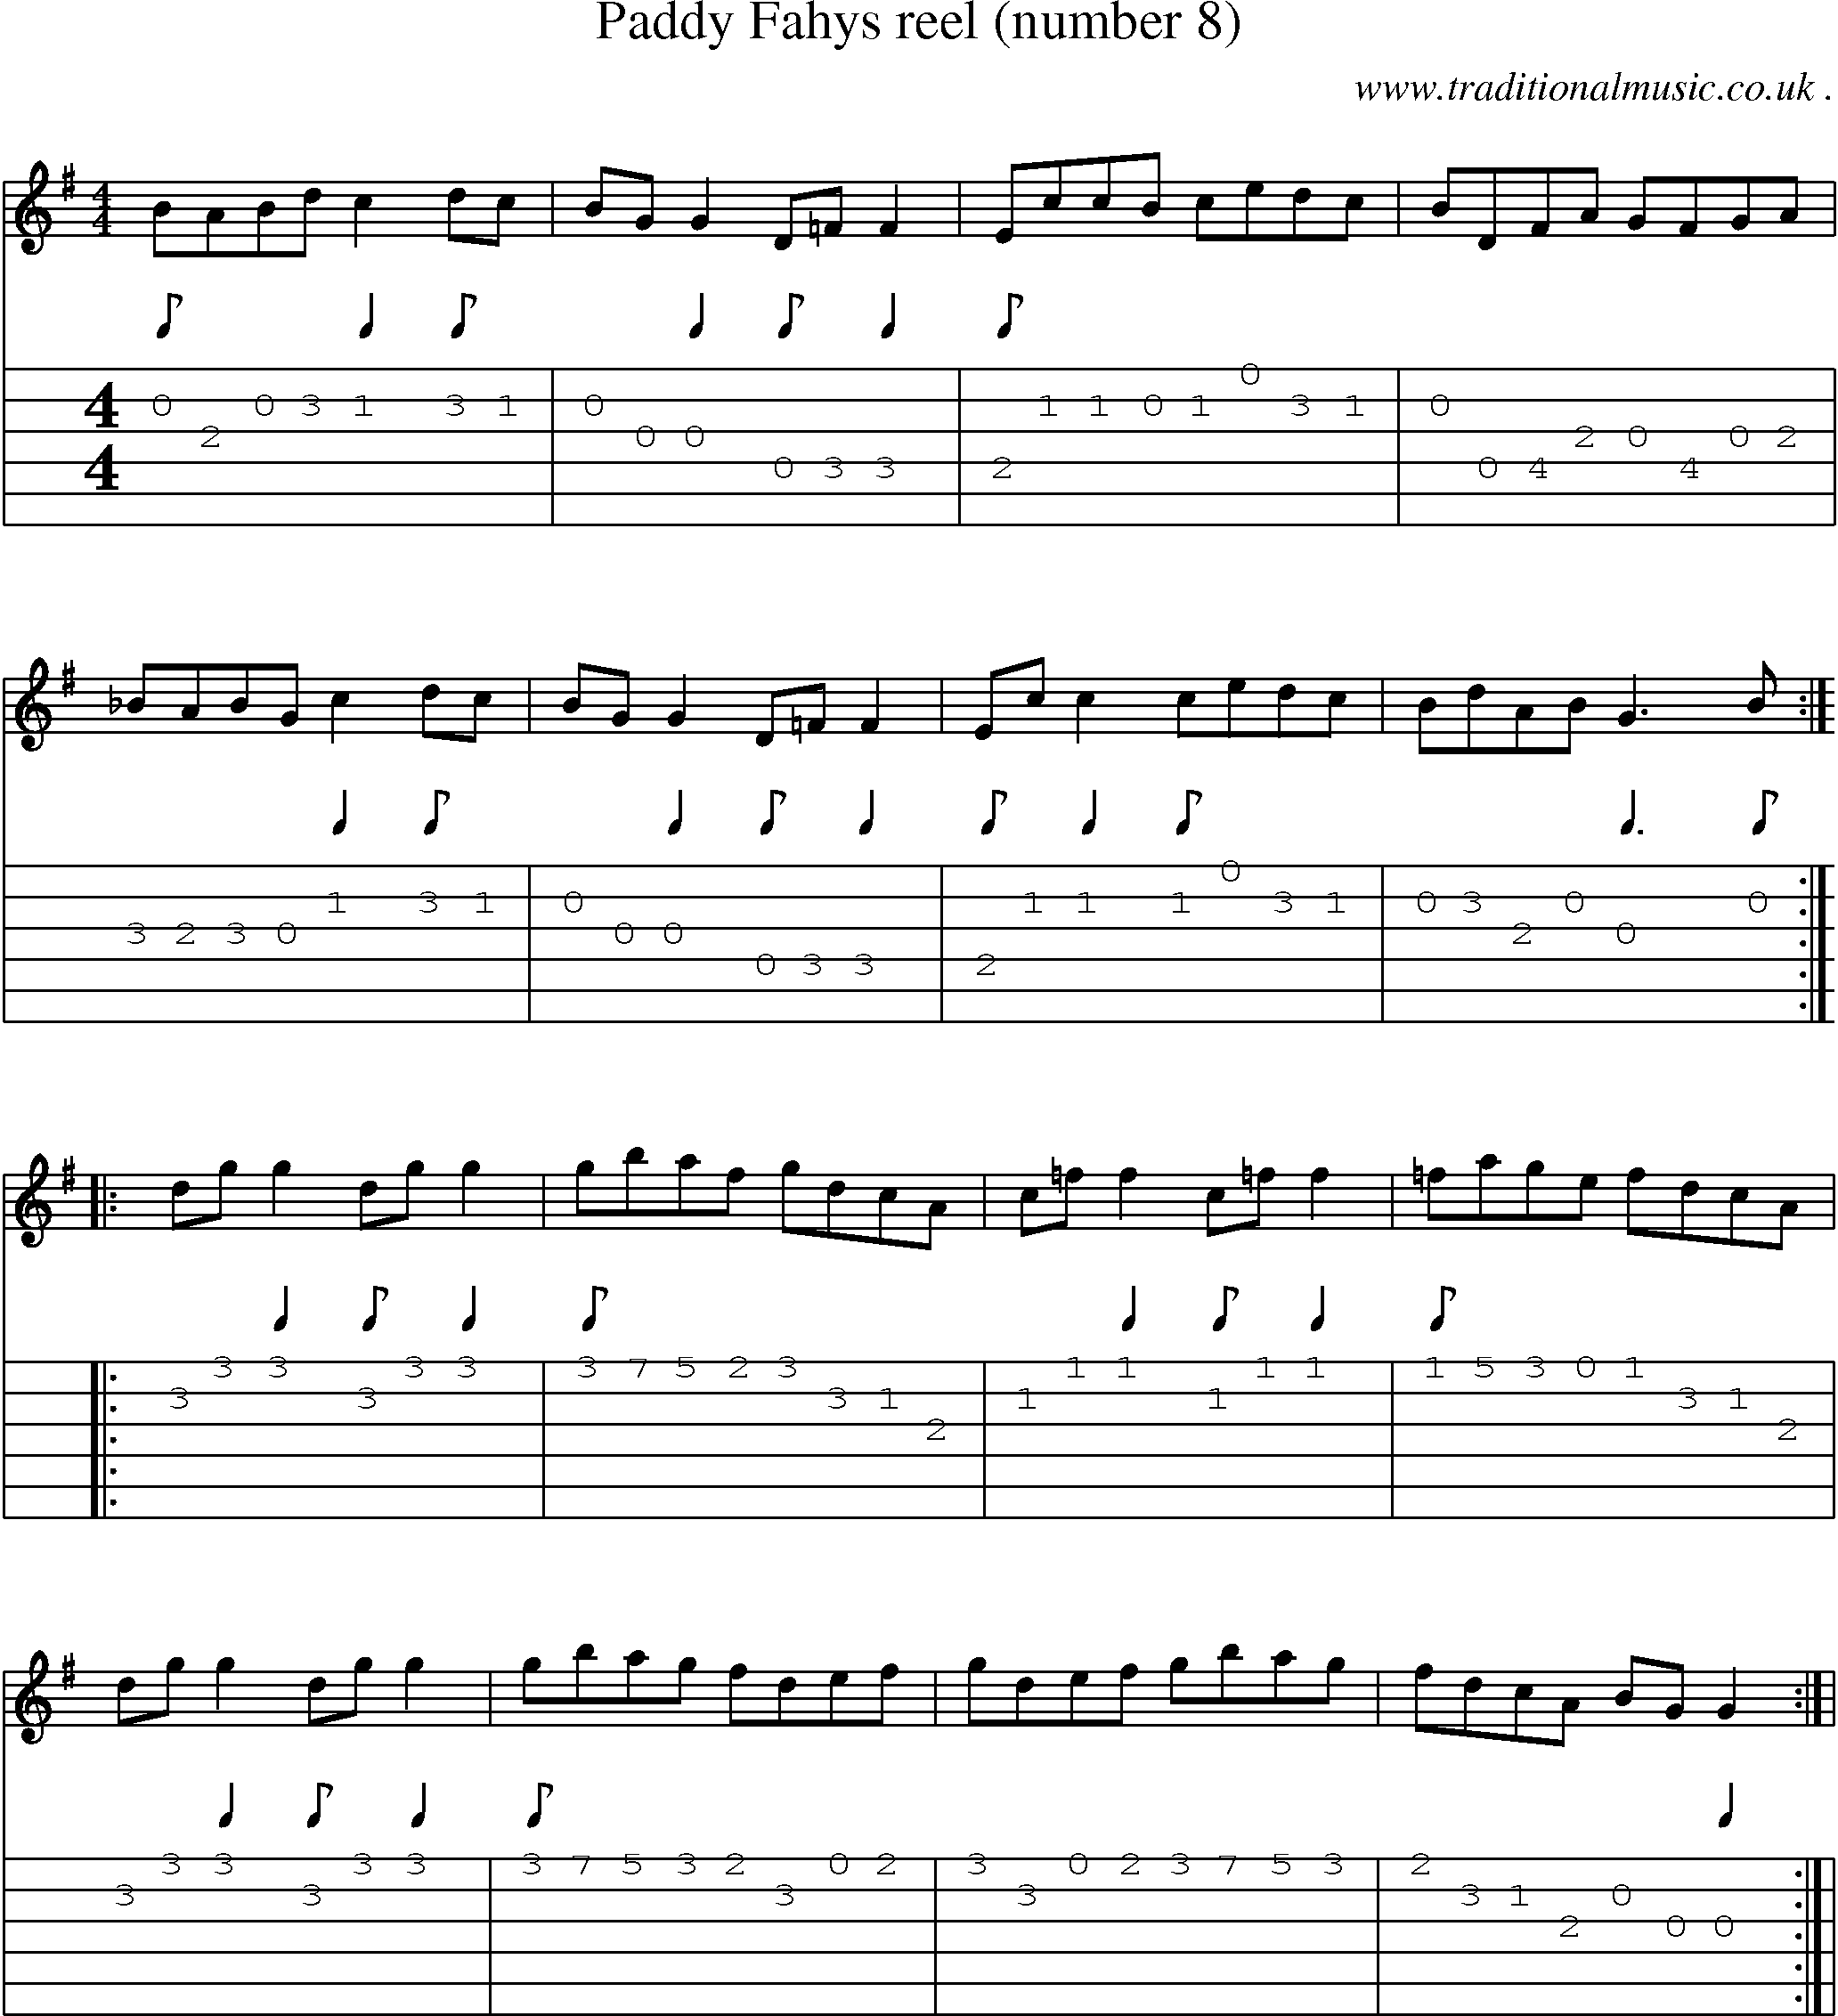 Sheet-Music and Guitar Tabs for Paddy Fahys Reel (number 8)